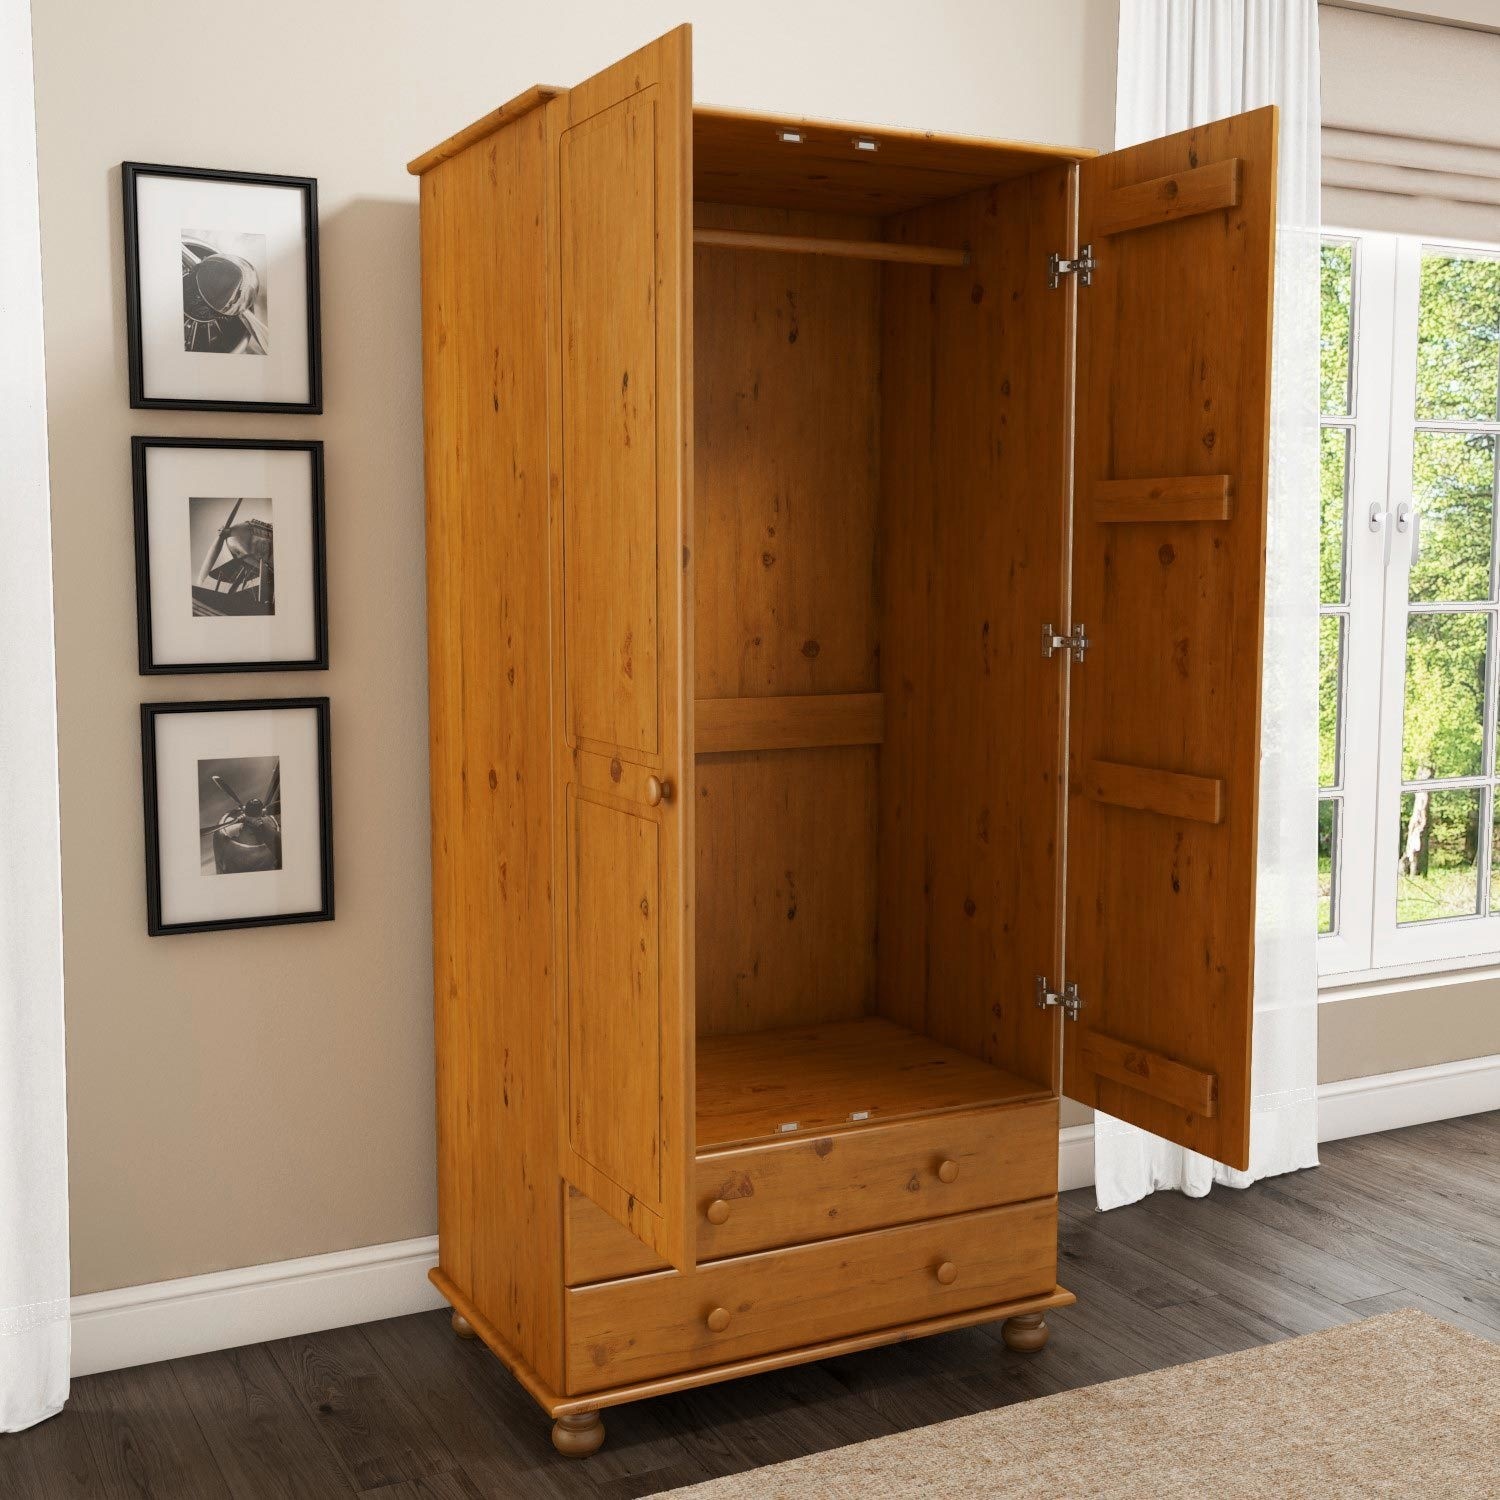 Read more about Pine 2 door double wardrobe with drawers hamilton